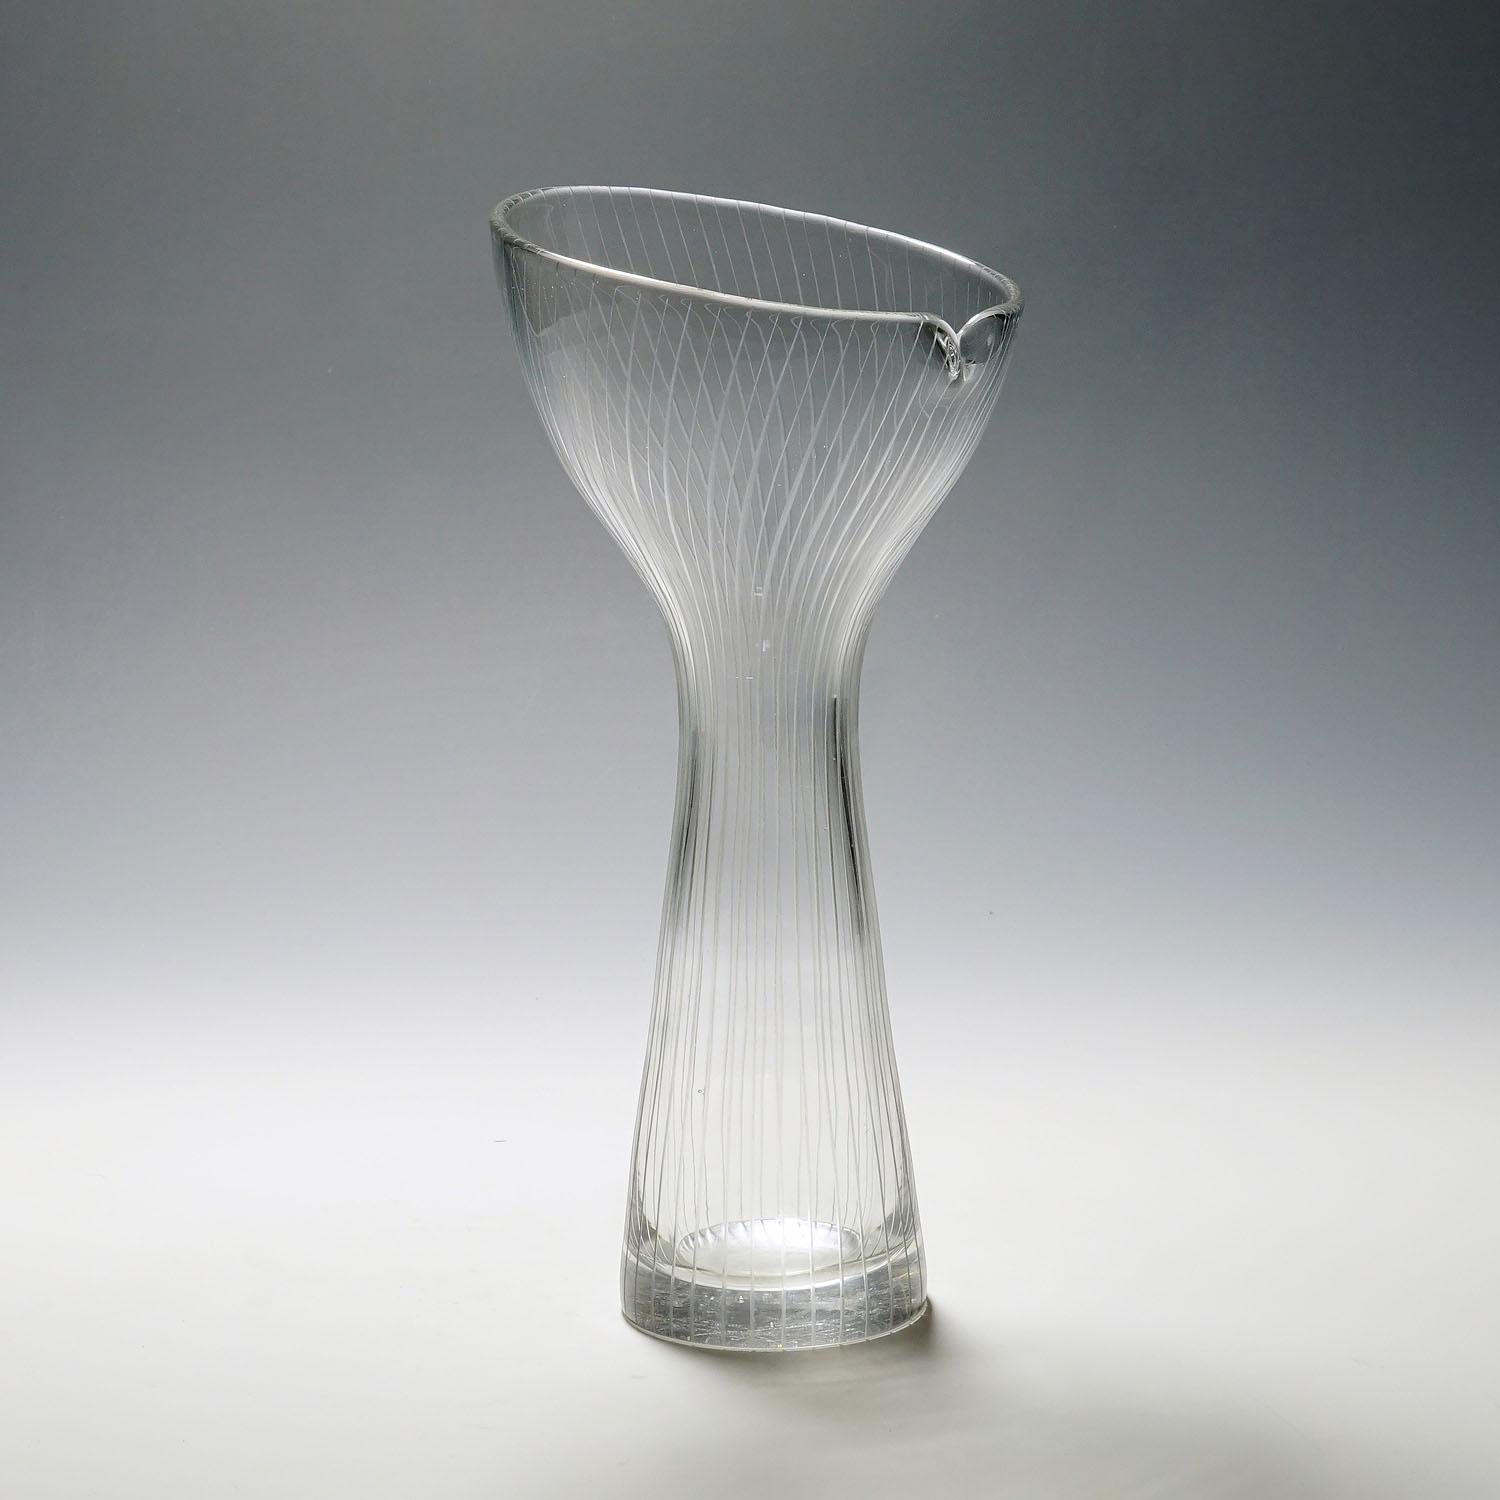 Vintage Art glass vase by Tapio Wirkkala for Iittala 1954

A large vintage art glass vase designed by Tapio Wirkkala for Iittala Glassworks in 1951, produced in 1954. Mold blown crystal clear glass with fine vertical line cuttings. Marked with